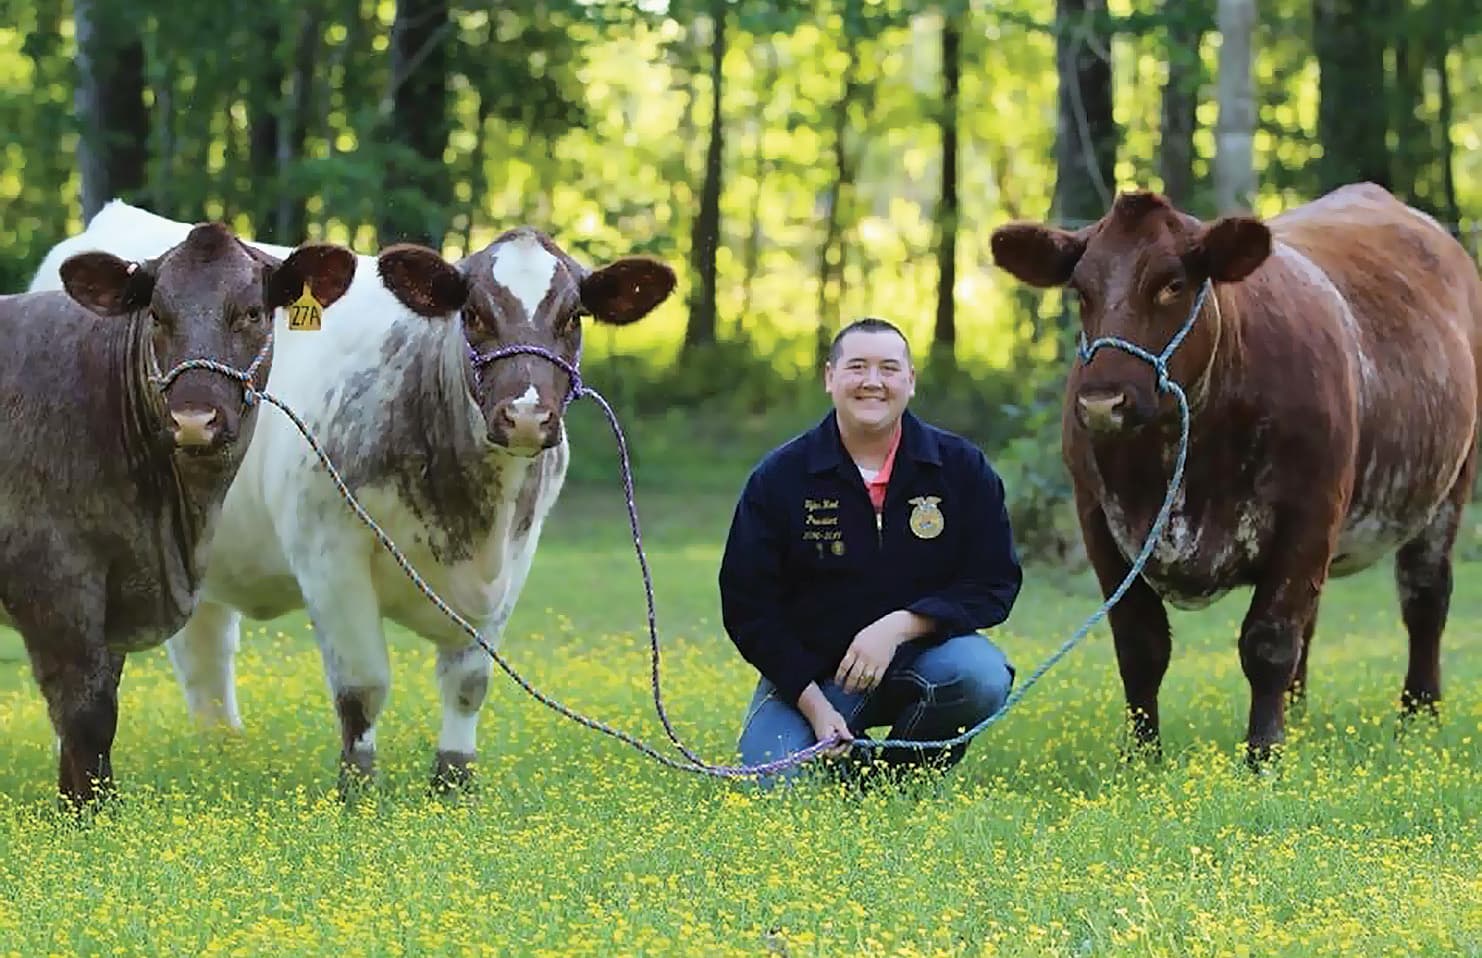 Tyler D. Root poses with three cows.